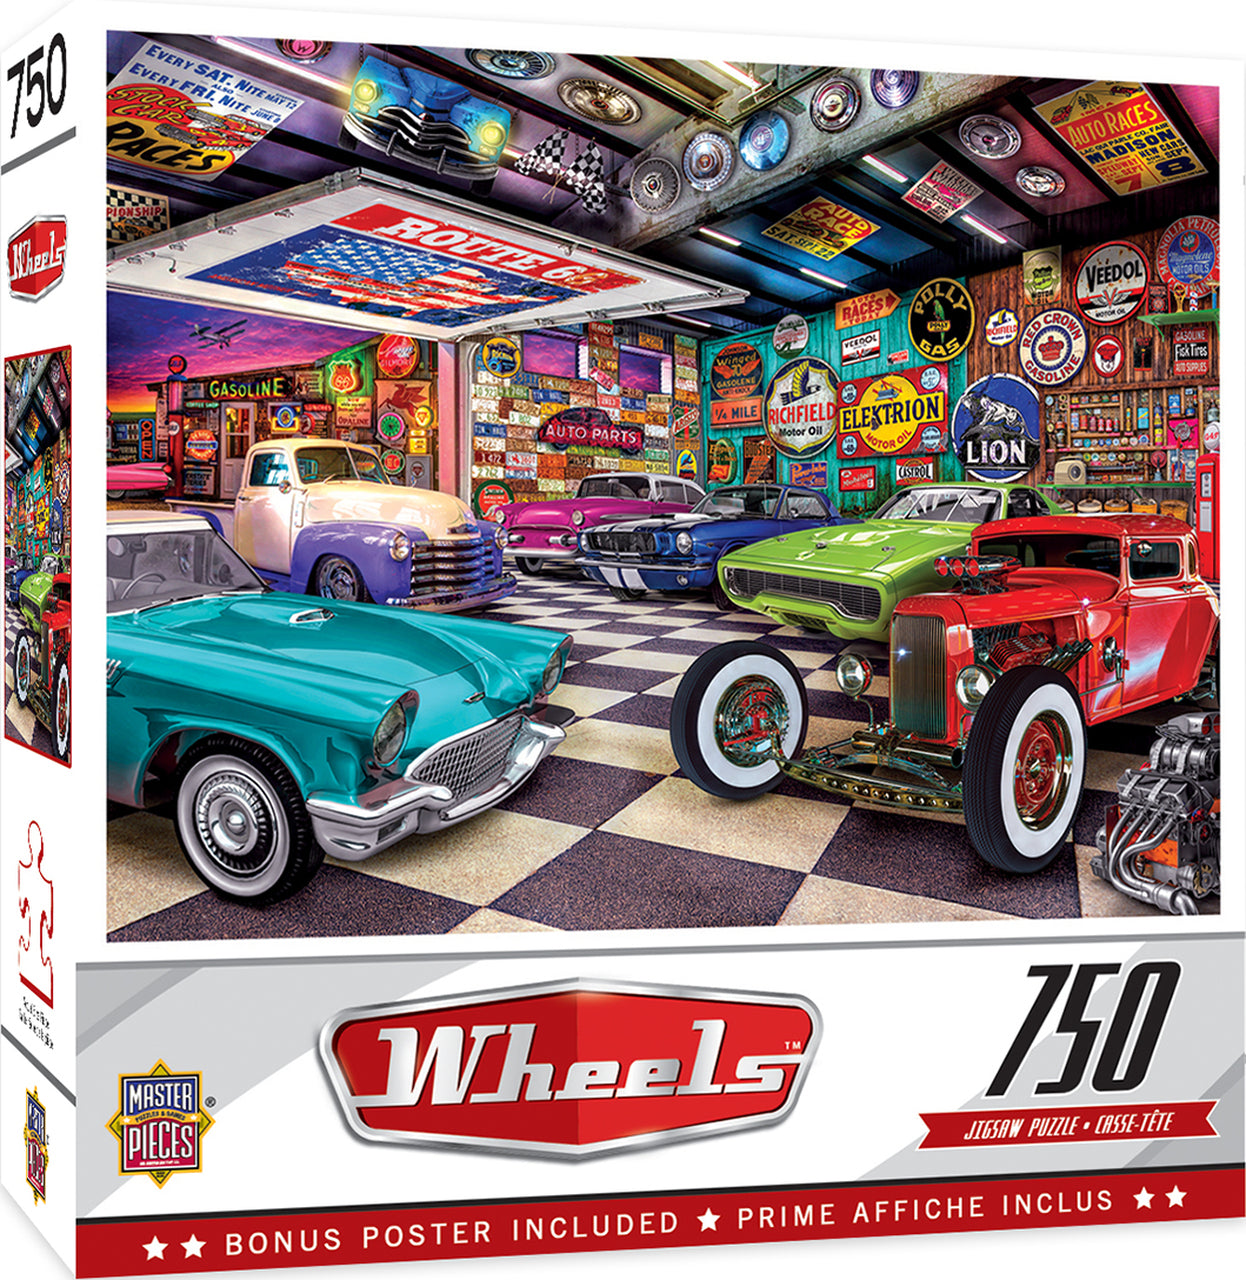 Wheels - Collector's Garage 750 Piece Jigsaw Puzzle by Masterpieces